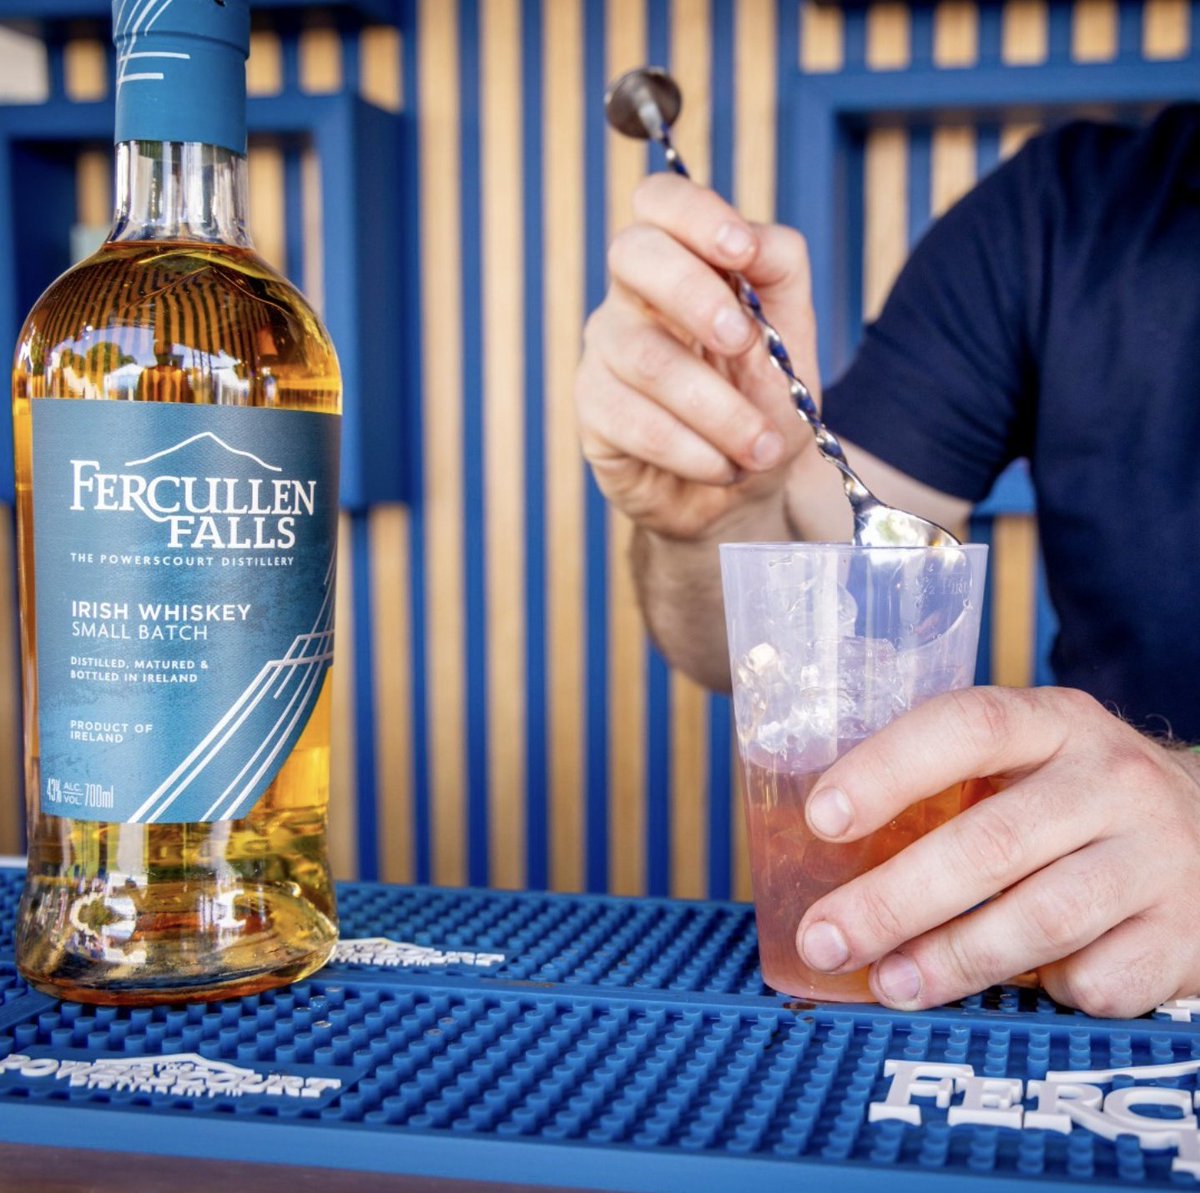 The countdown is on to our biggest event of the summer... The Fercullen Whiskey stand will be back at @tasteofdublin again this year 🥃 #TasteOfDublin #FercullenWhiskey